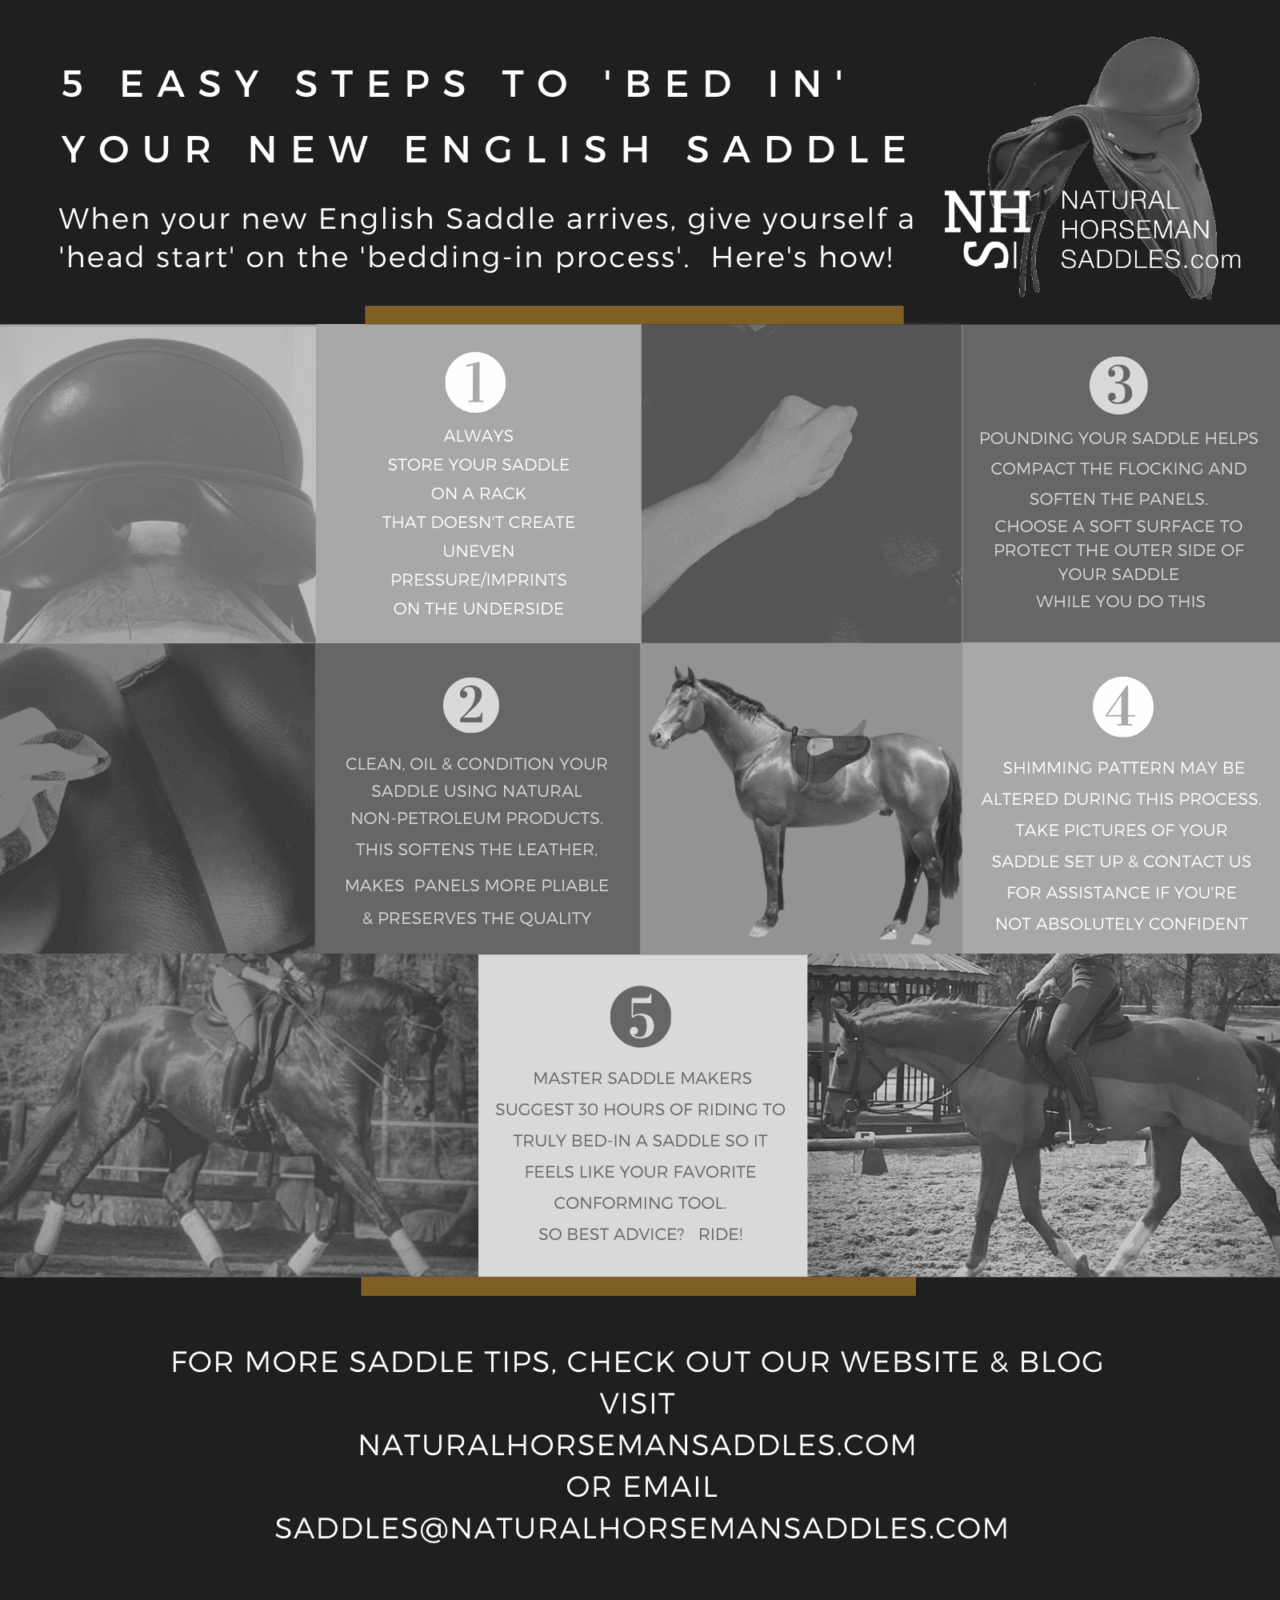 5 Easy Steps to BED IN Your New English Saddle INFOGRAPHIC